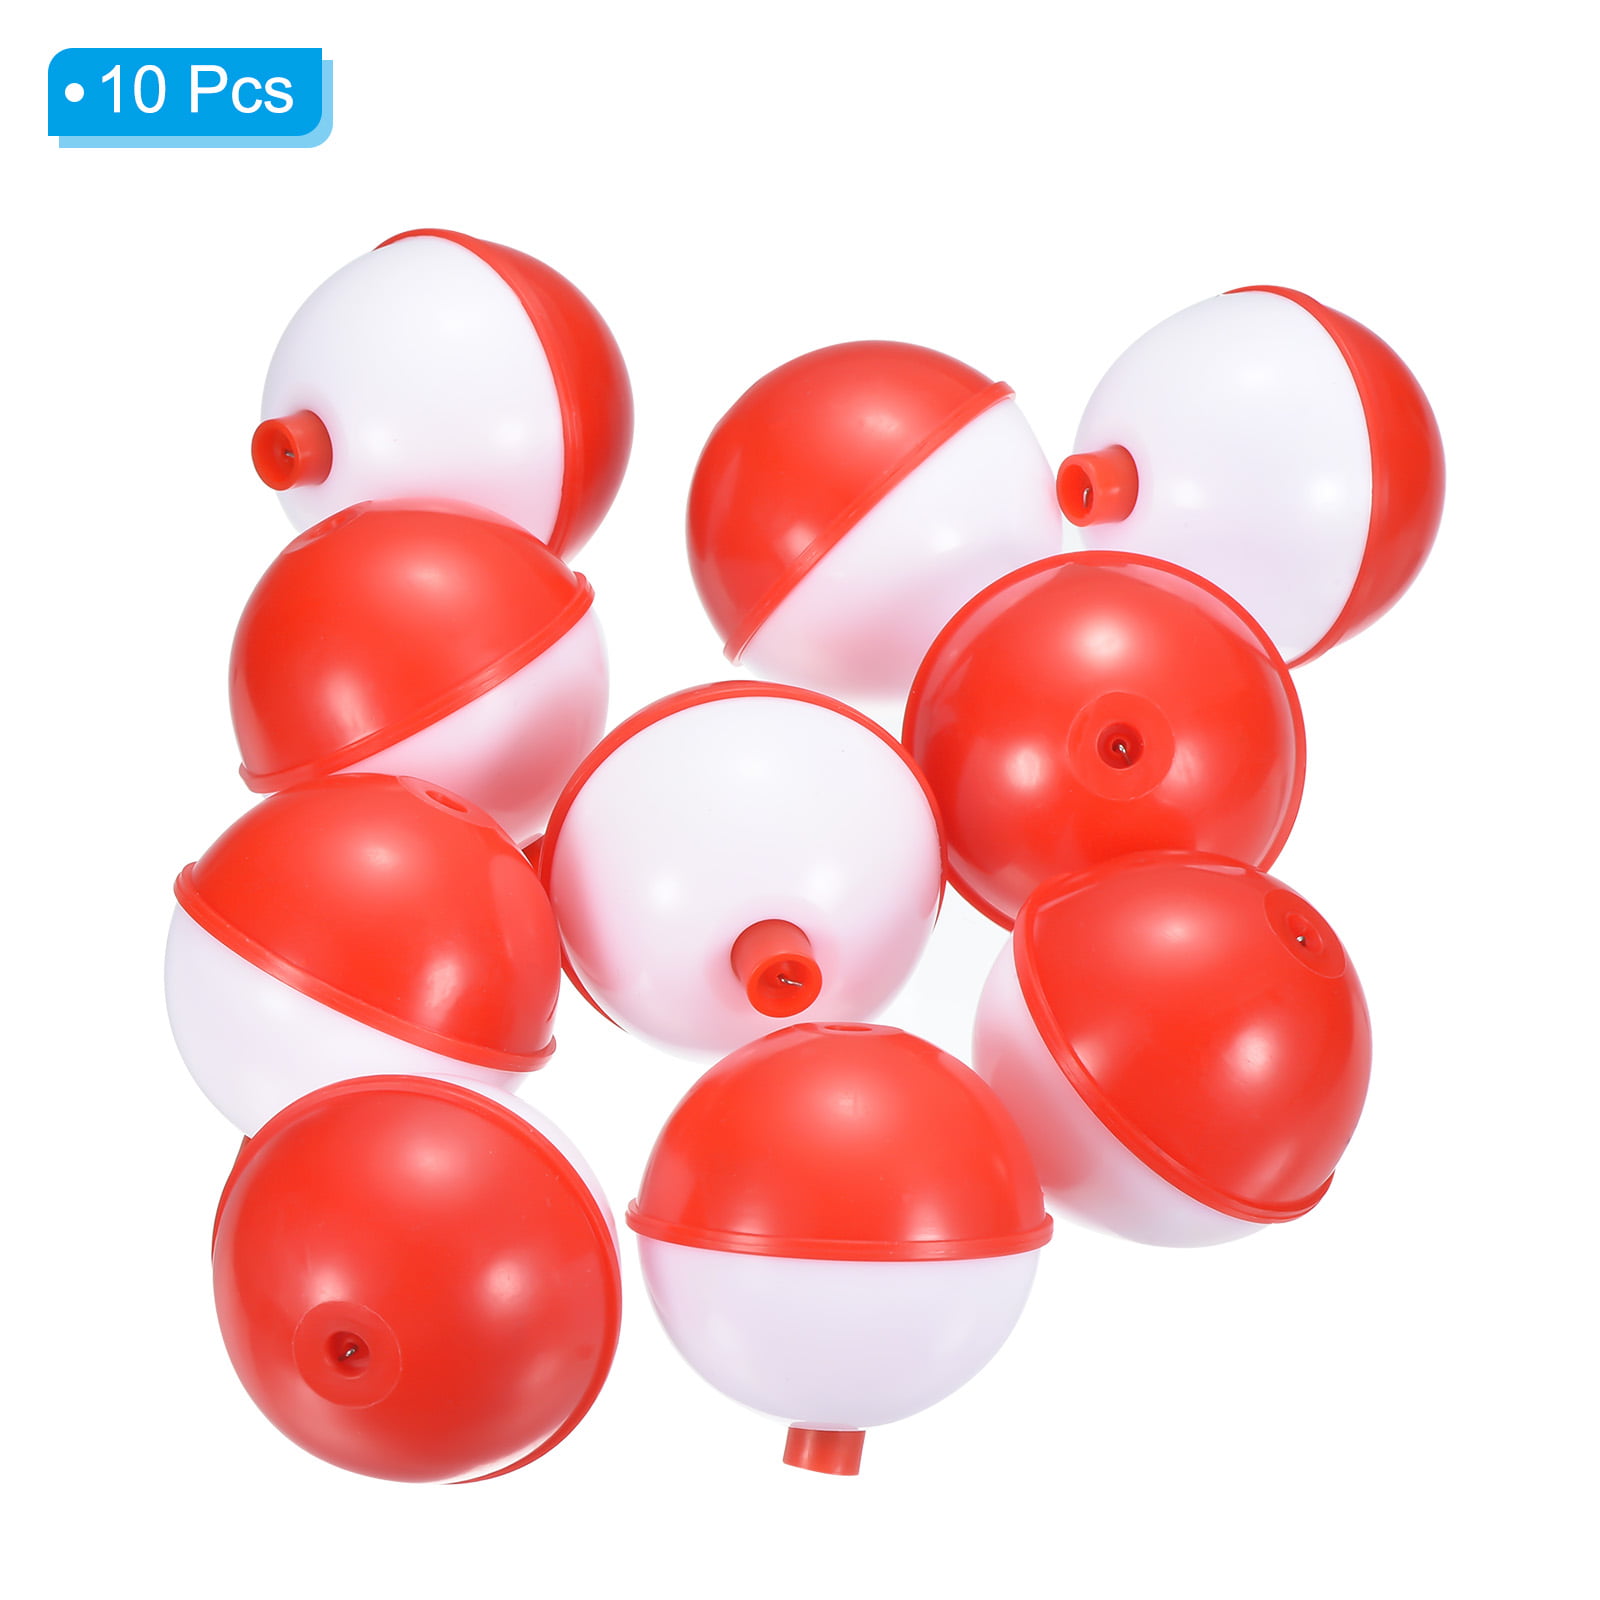 1.5-2 10pcs Fishing Bobber Buoy Round Float Sea Fishing Floats Plastic  Floats For Fishing Dobbers Yellow Red Color - AliExpress